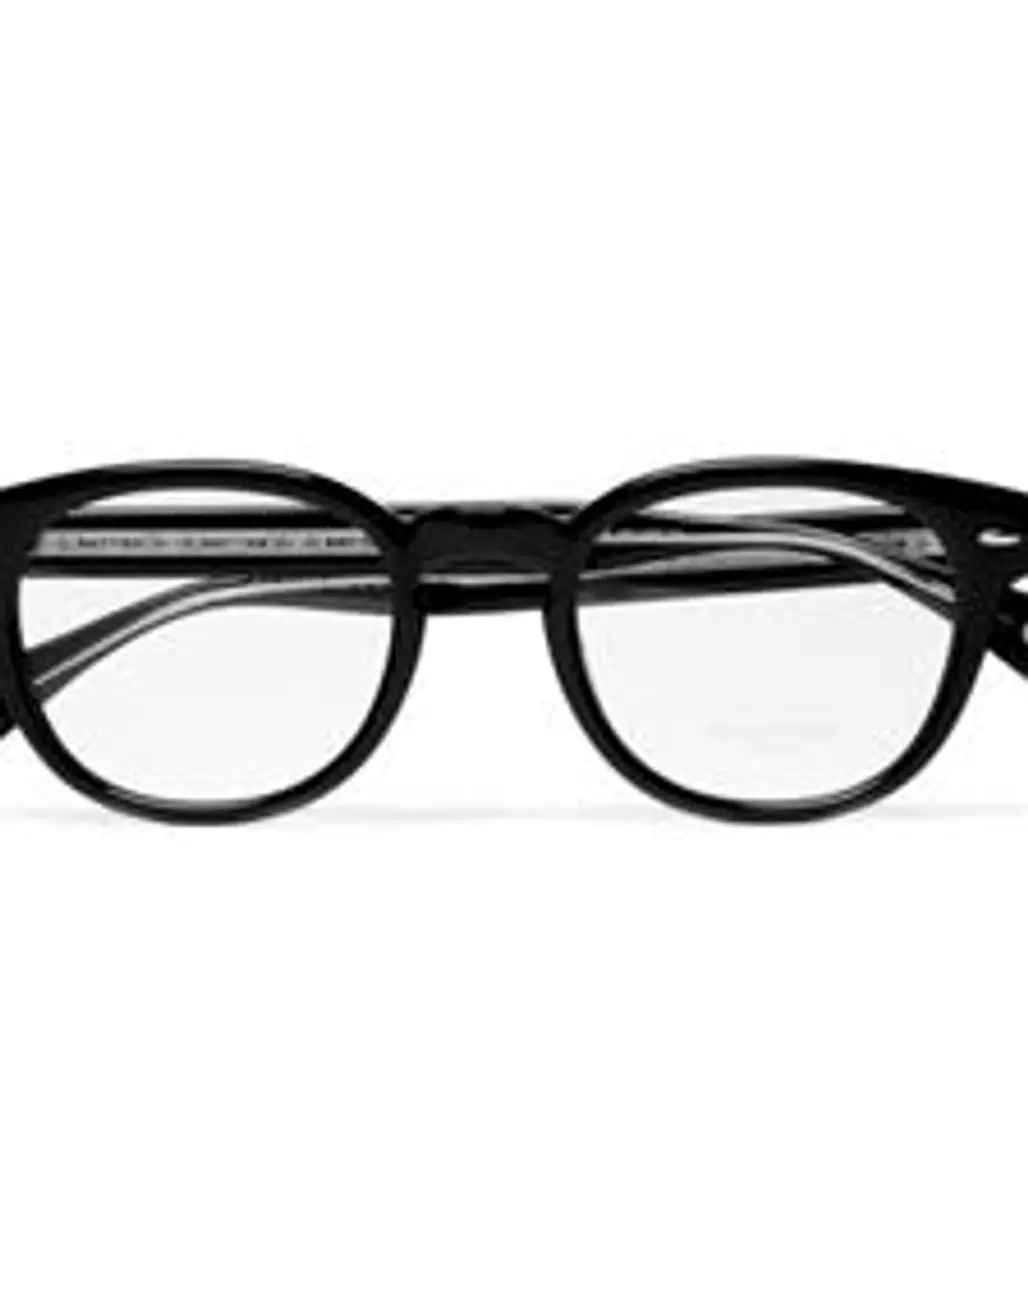 Oliver Peoples round Optical Glasses...